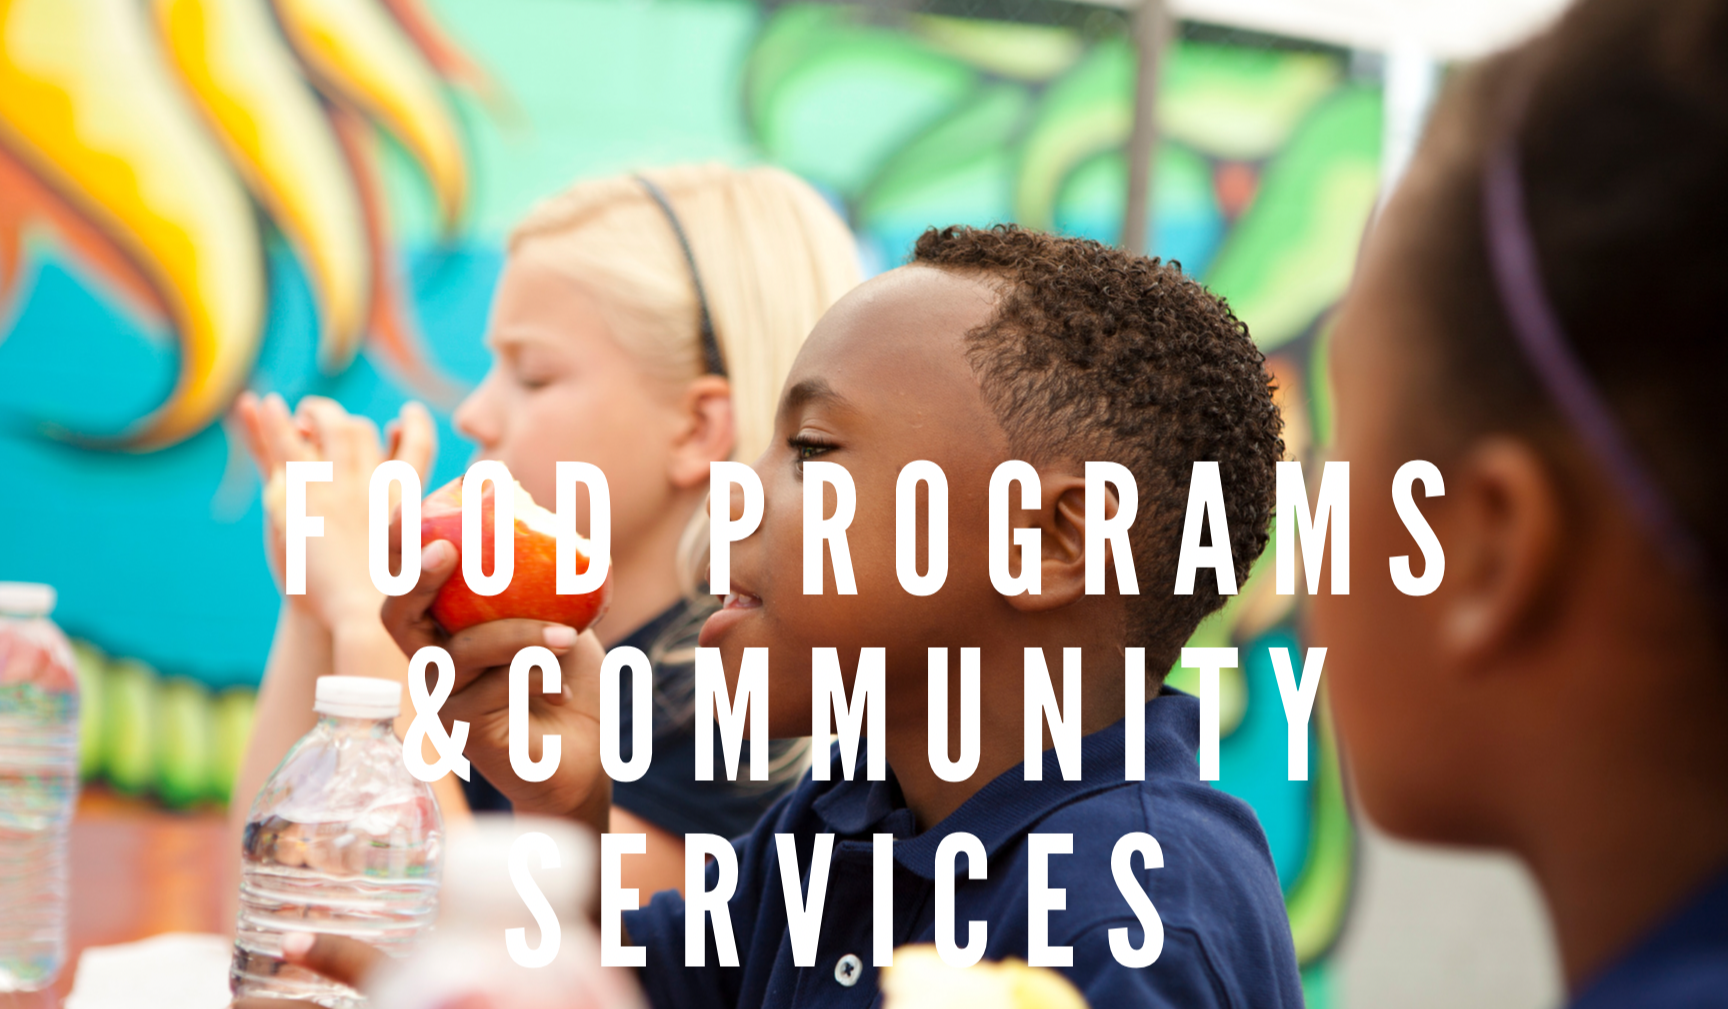 Food and Community Services